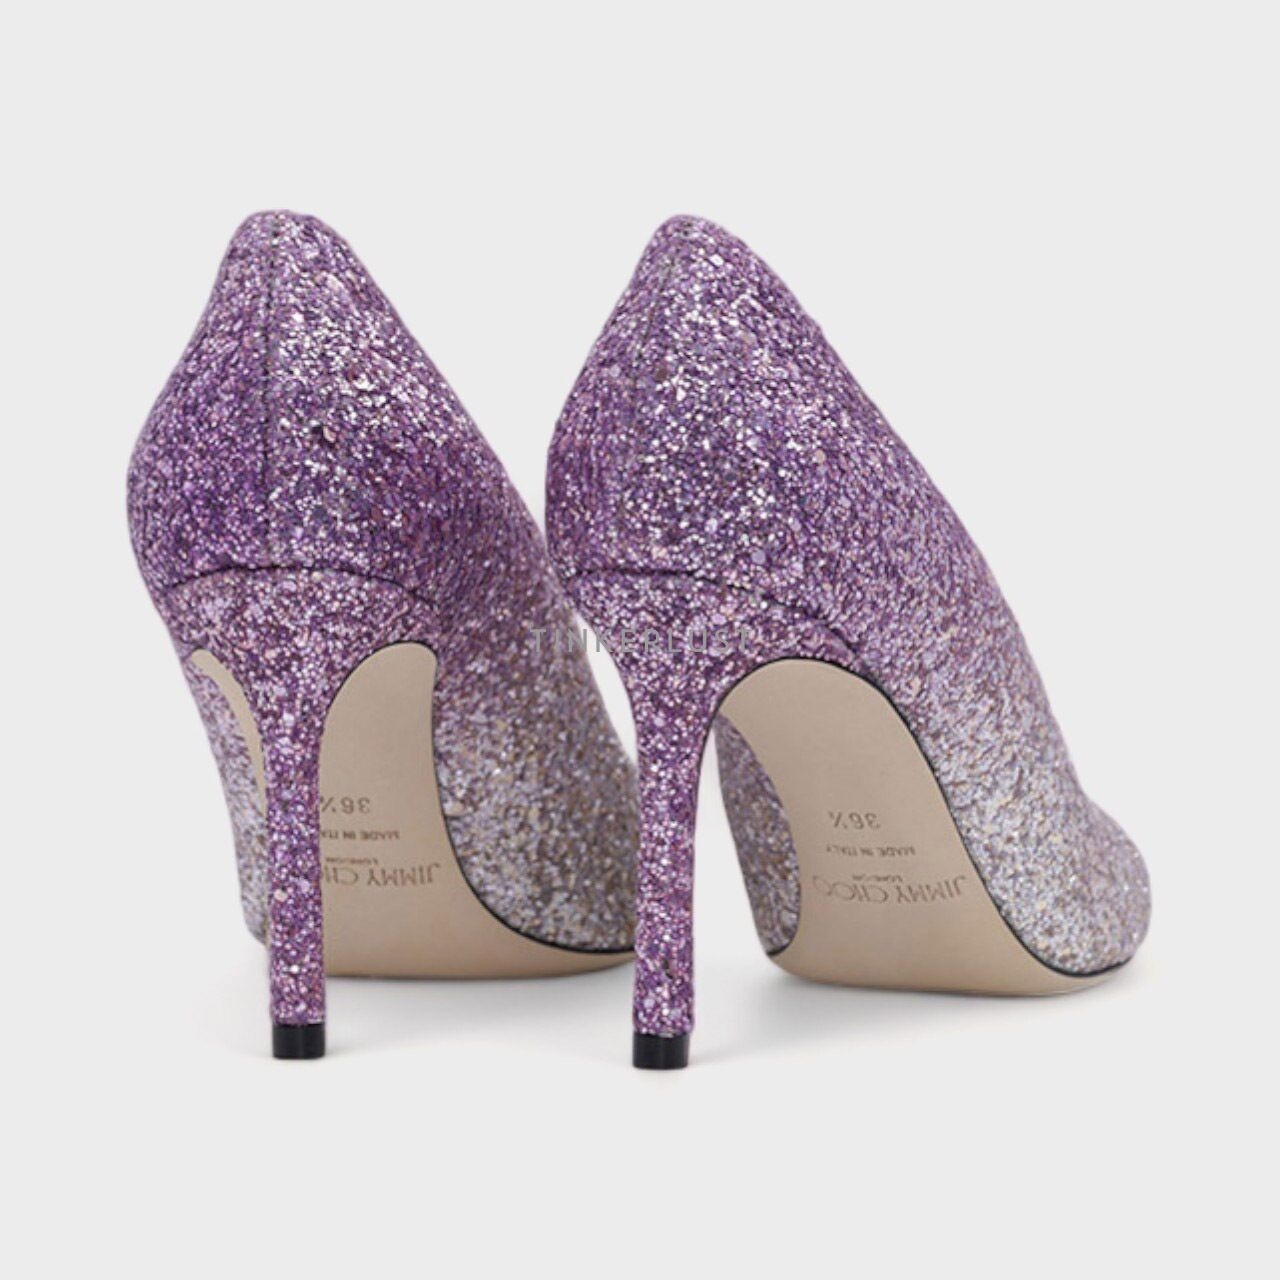 JIMMY CHOO Romy Pumps 85mm Glittered in Champagne/Pink Violet